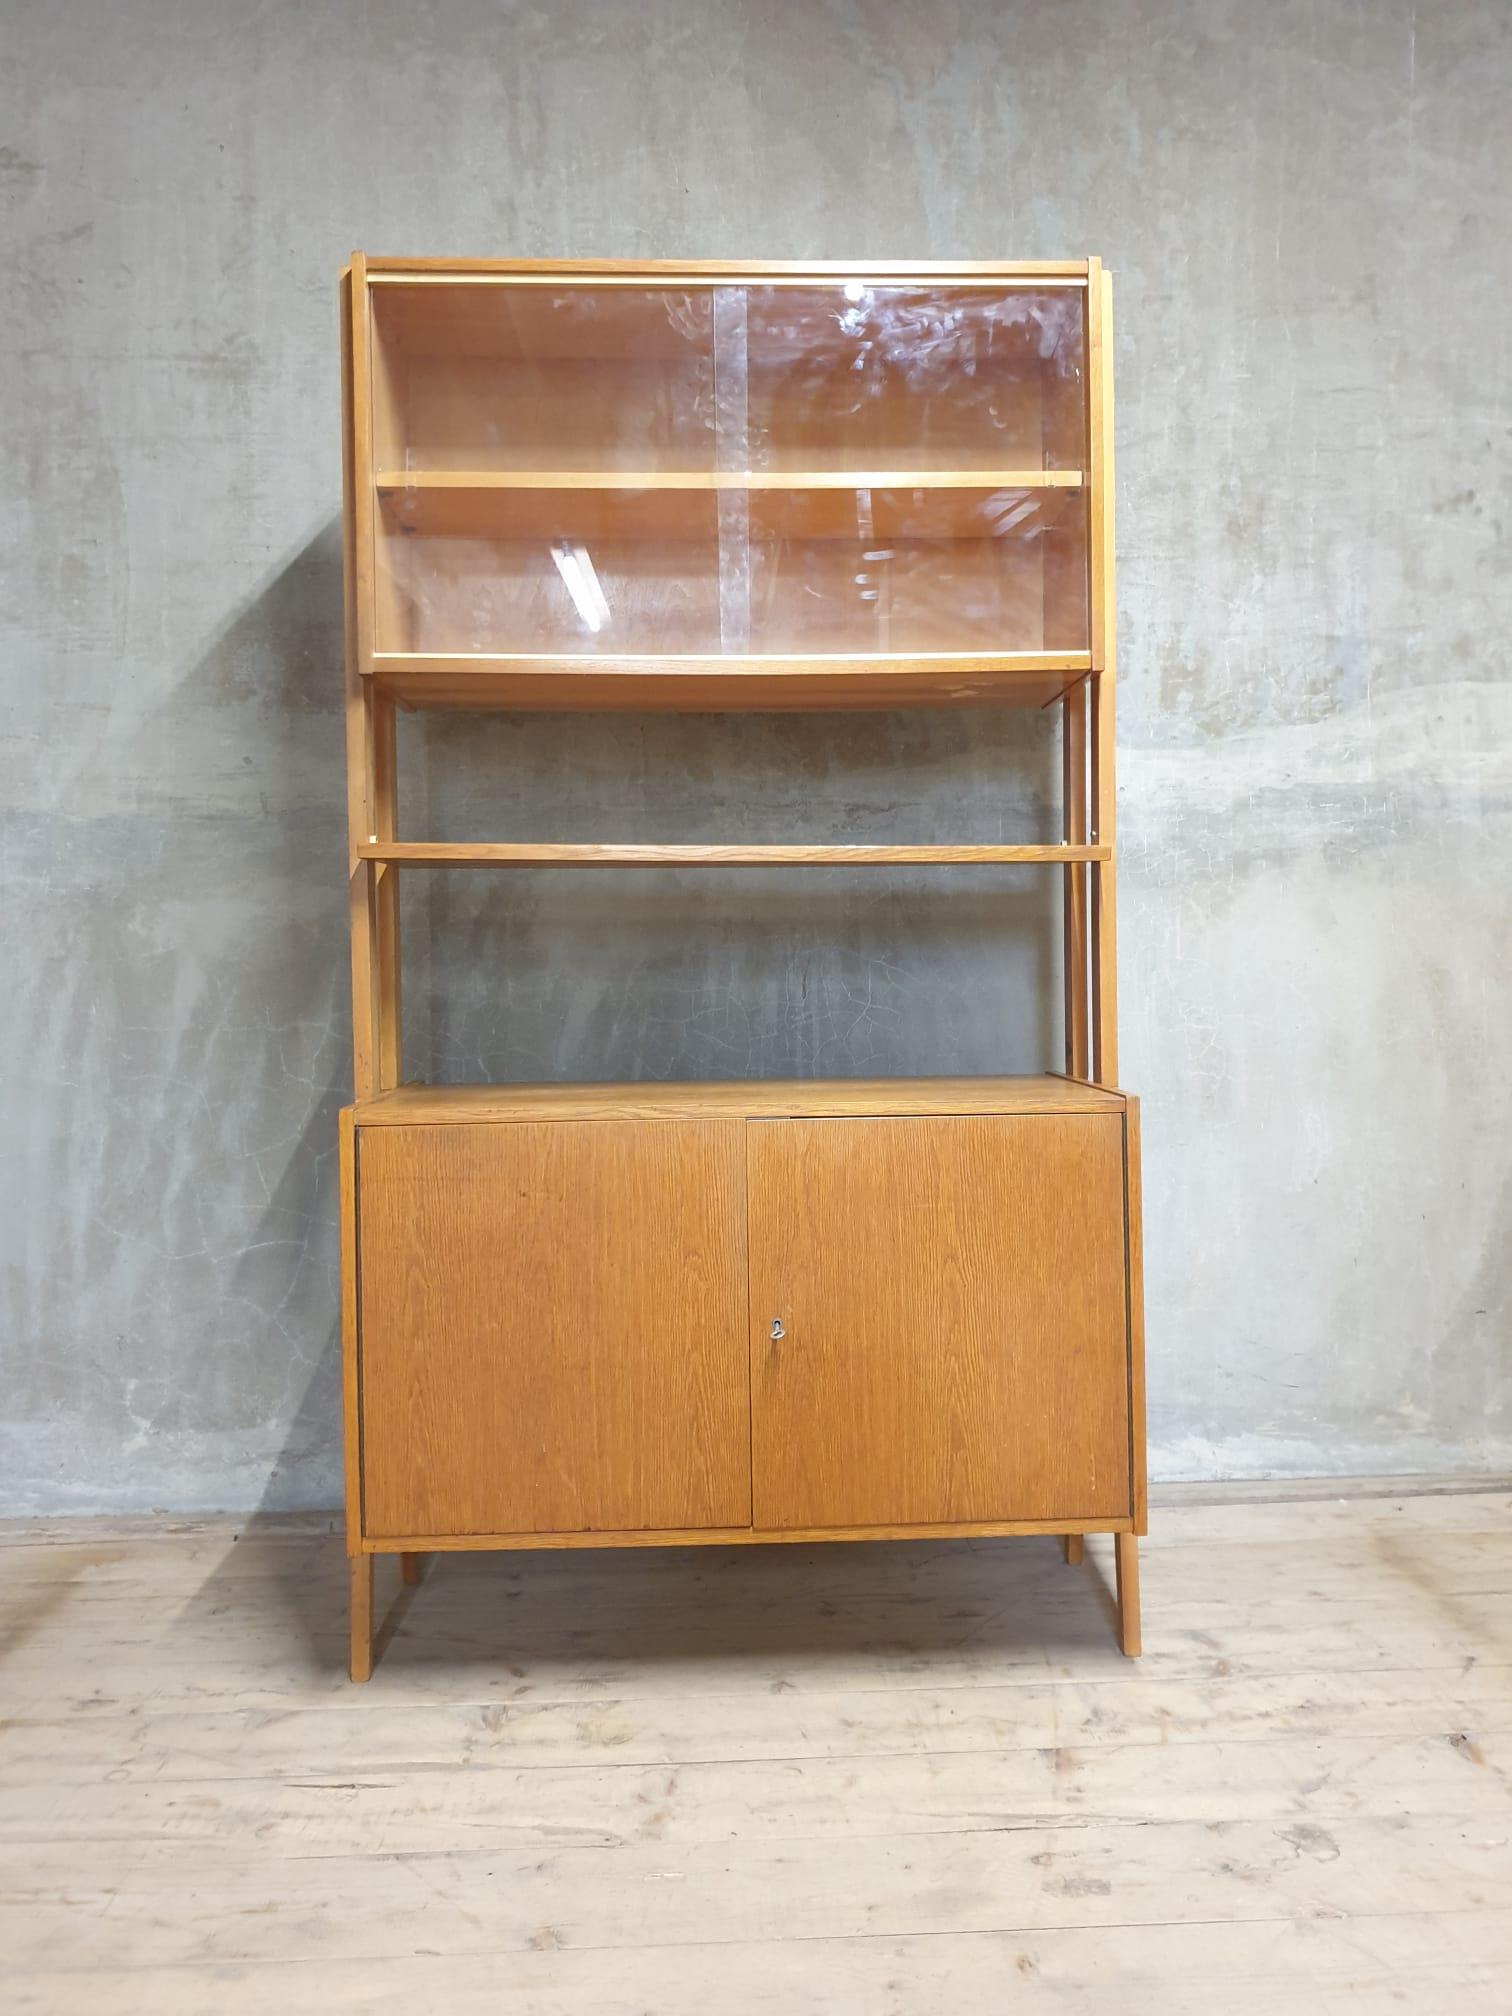 Mid century Vintage bookcase from the 1960´s. It was designed by František Jirák for Tatra nábytok in the former Czechoslovakia. Features a simple design, a glazed section with a storage space.

In very good Vintage condition, showing slight signs